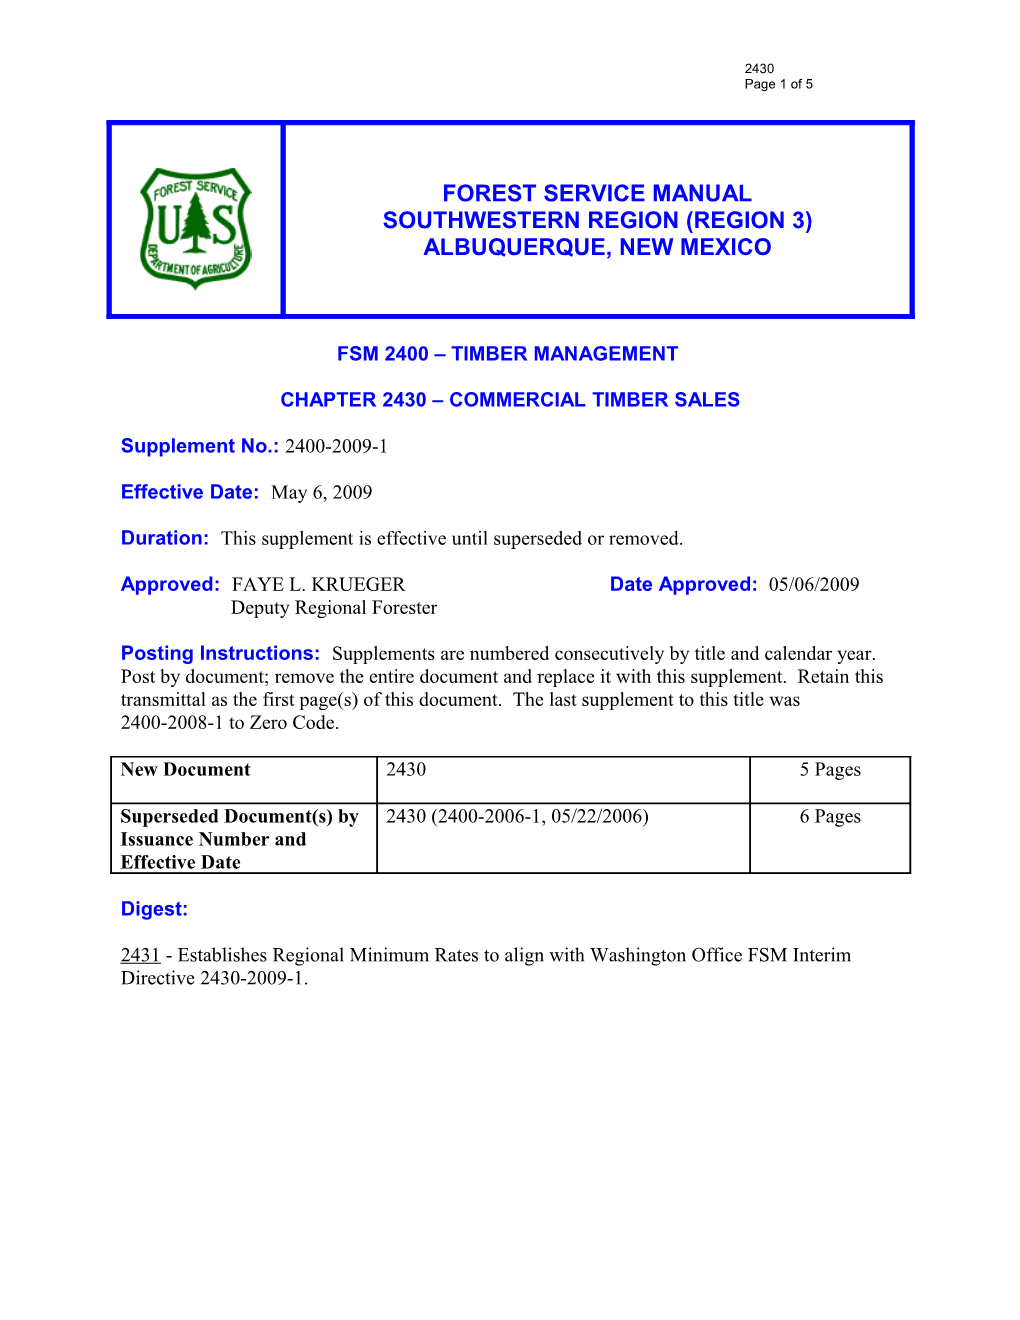 Chapter 2430 COMMERCIAL TIMBER SALES s1